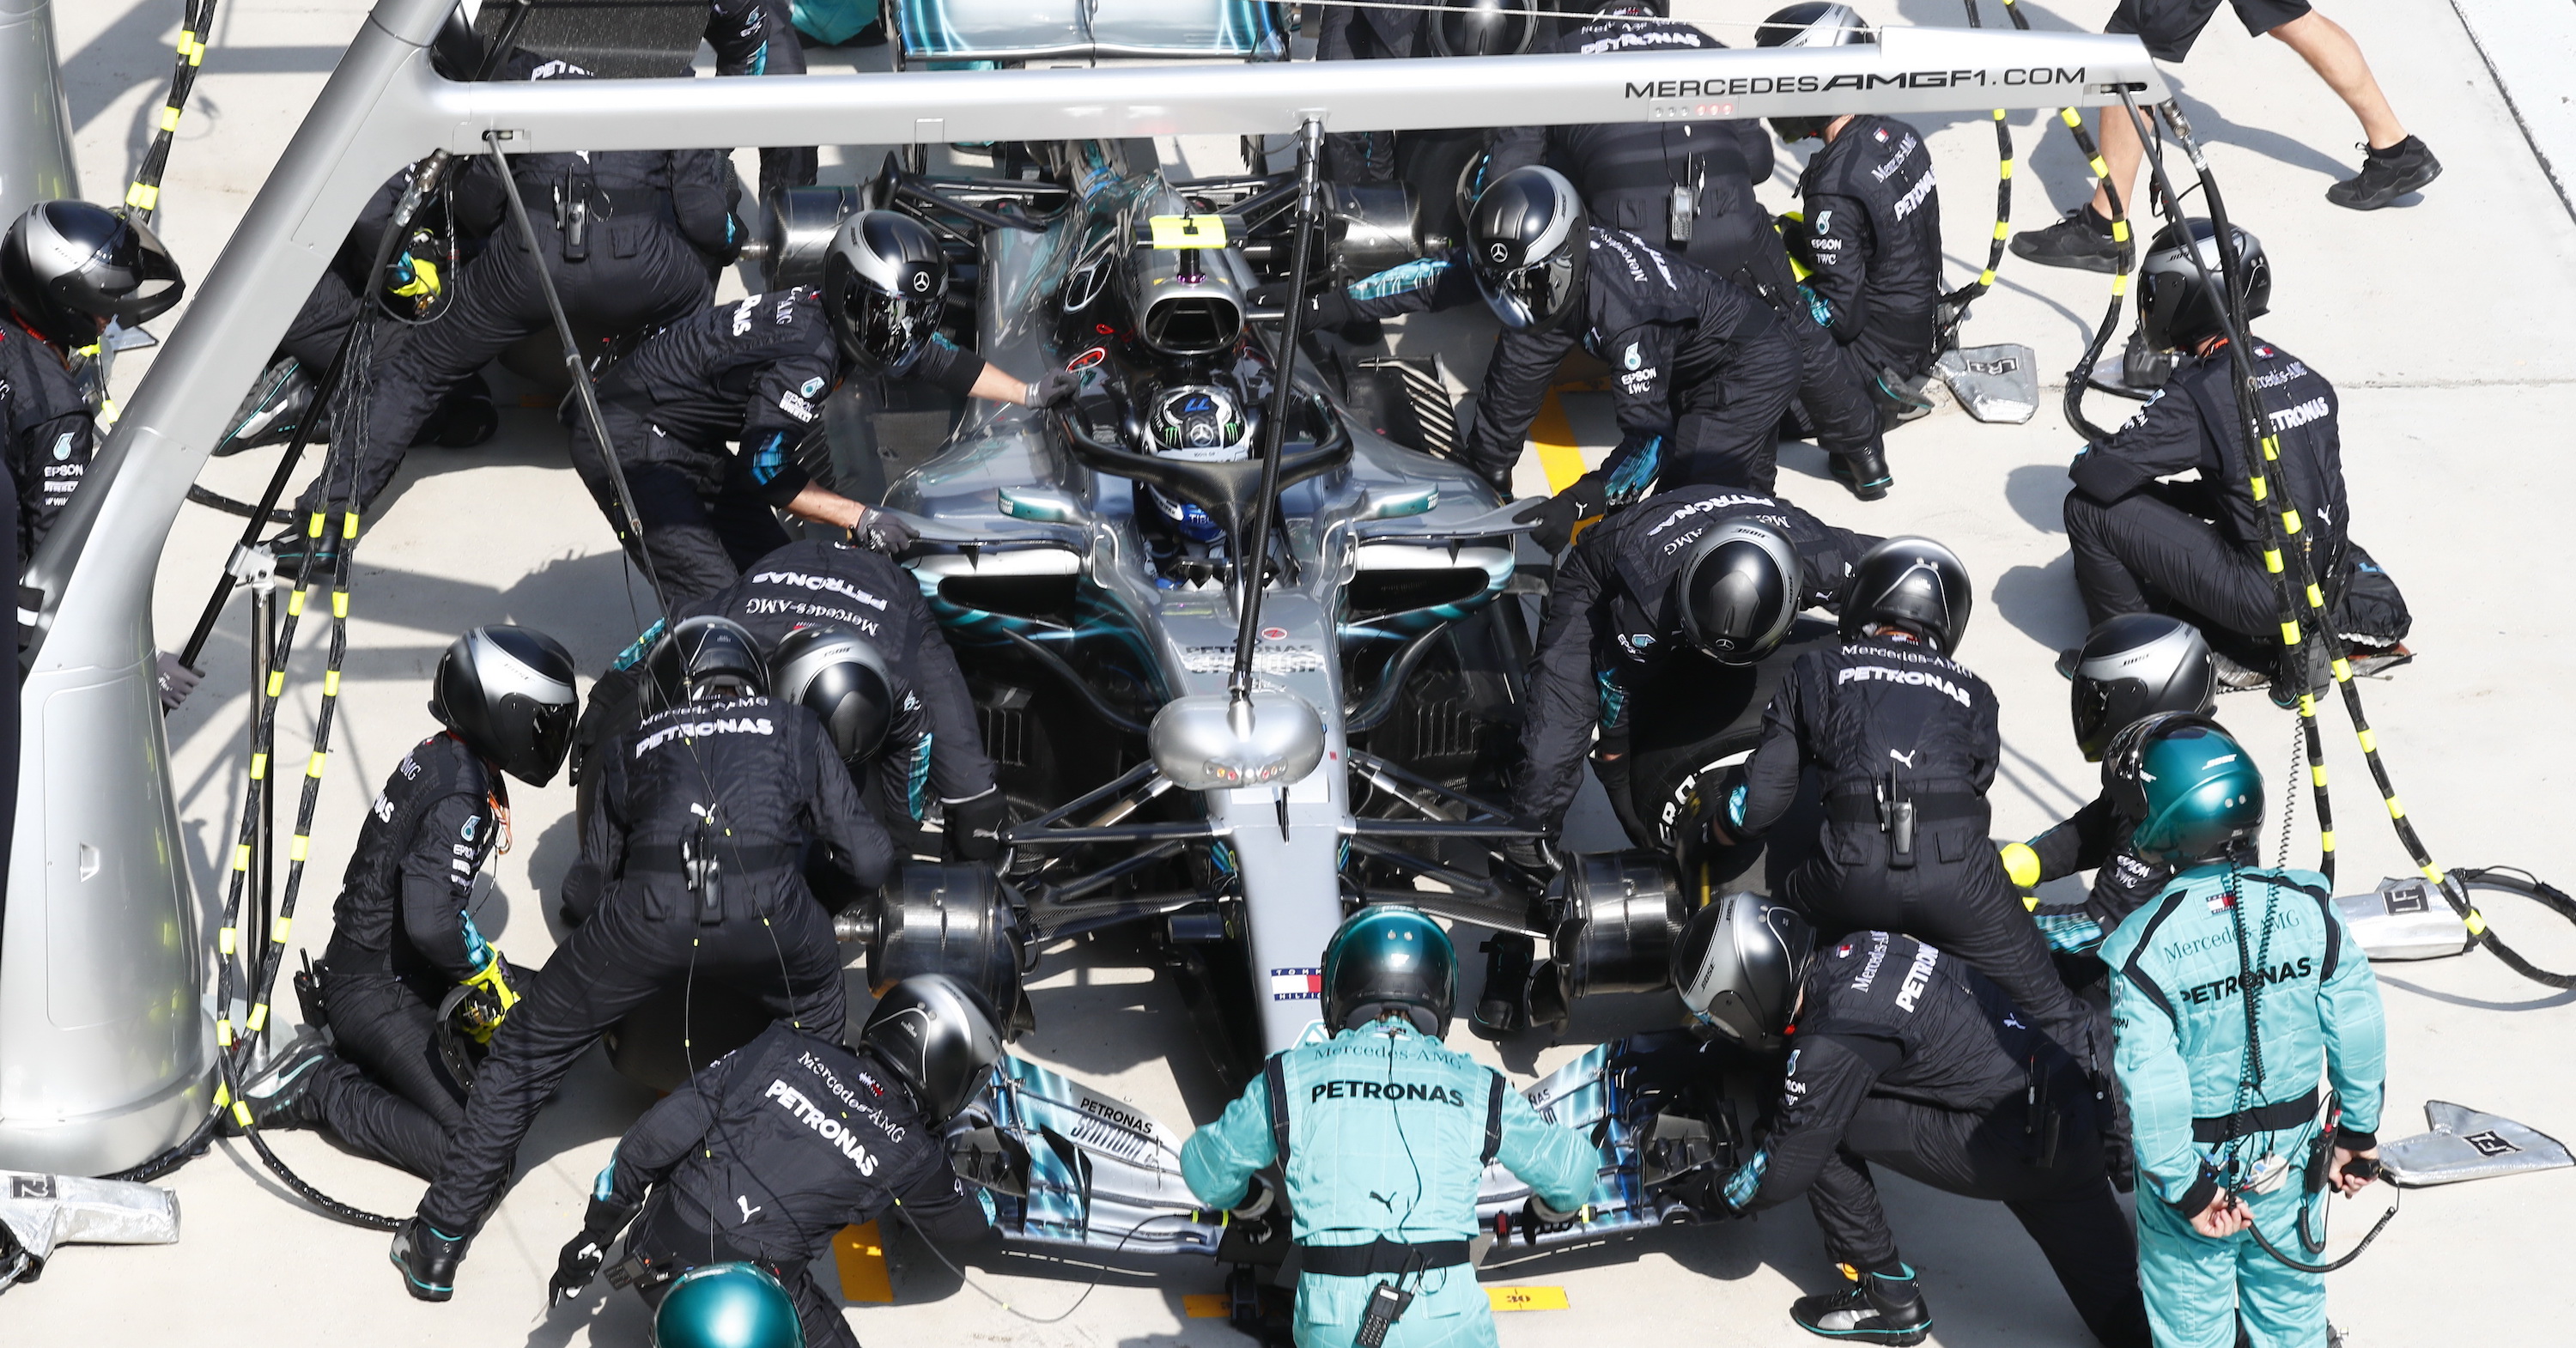 Mercedes F1 during the 2018 Chinese Grand Prix